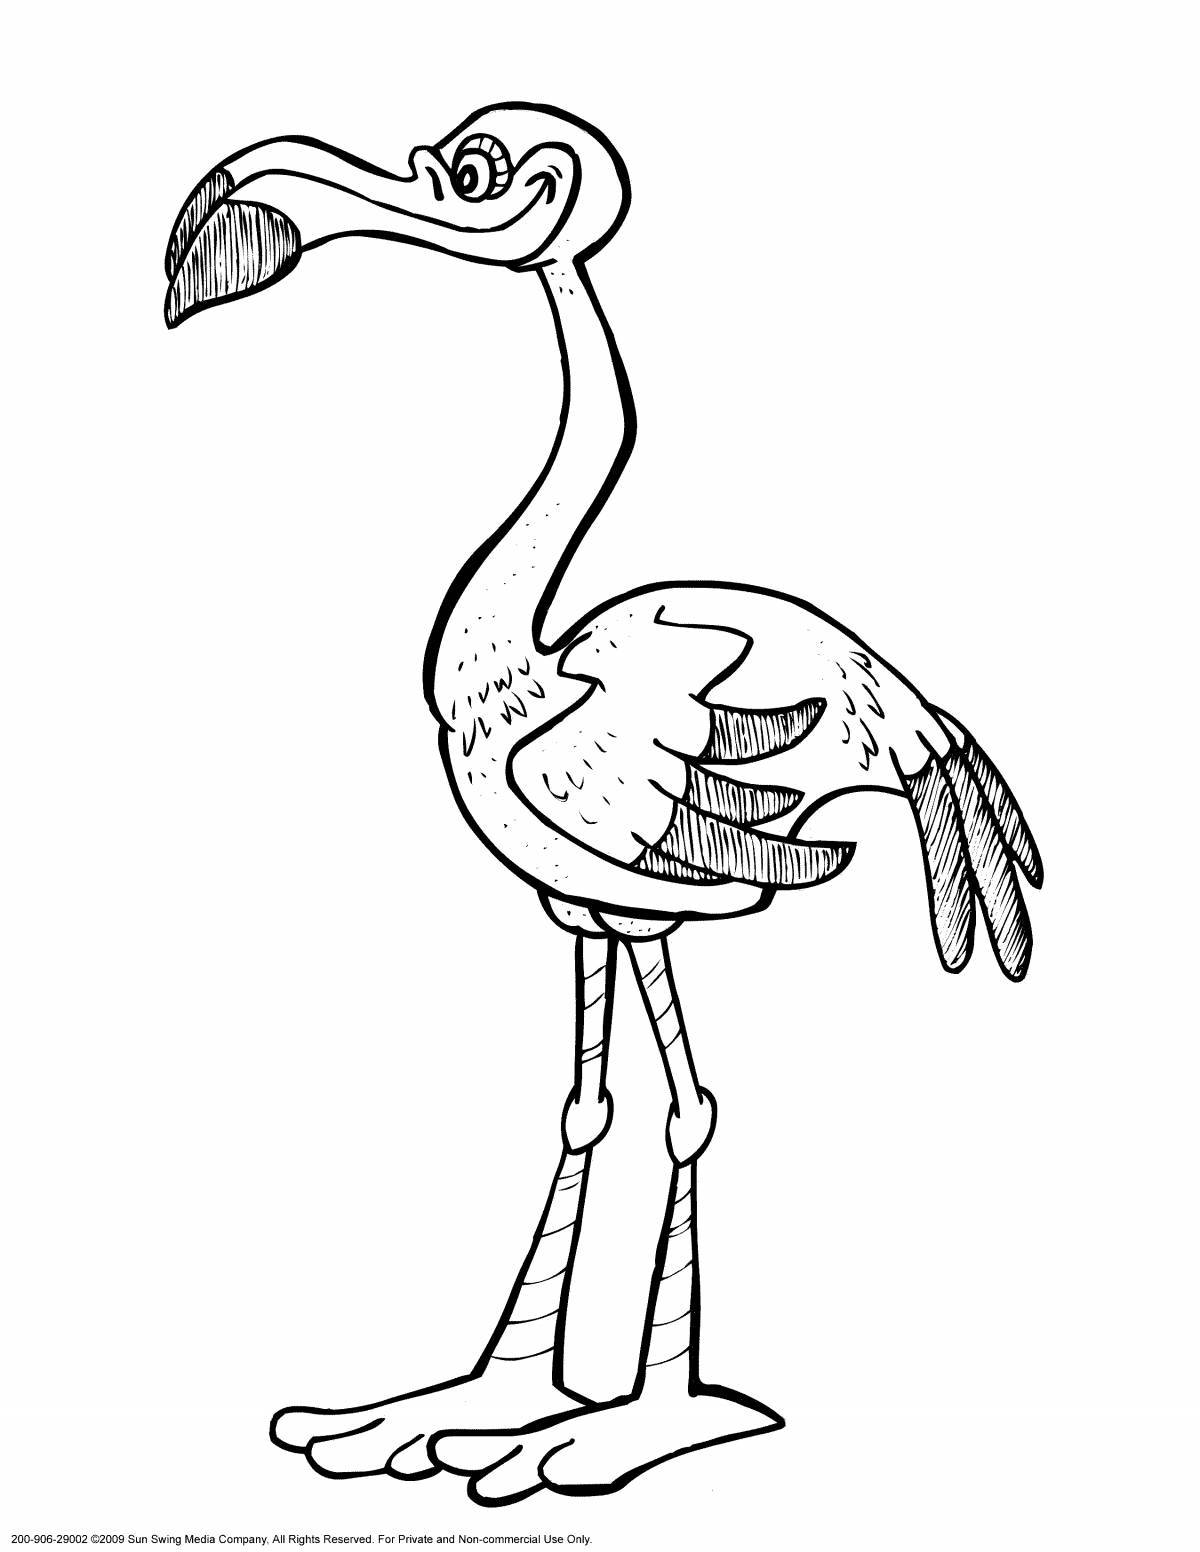 Coloring pages with playful flamingos for kids